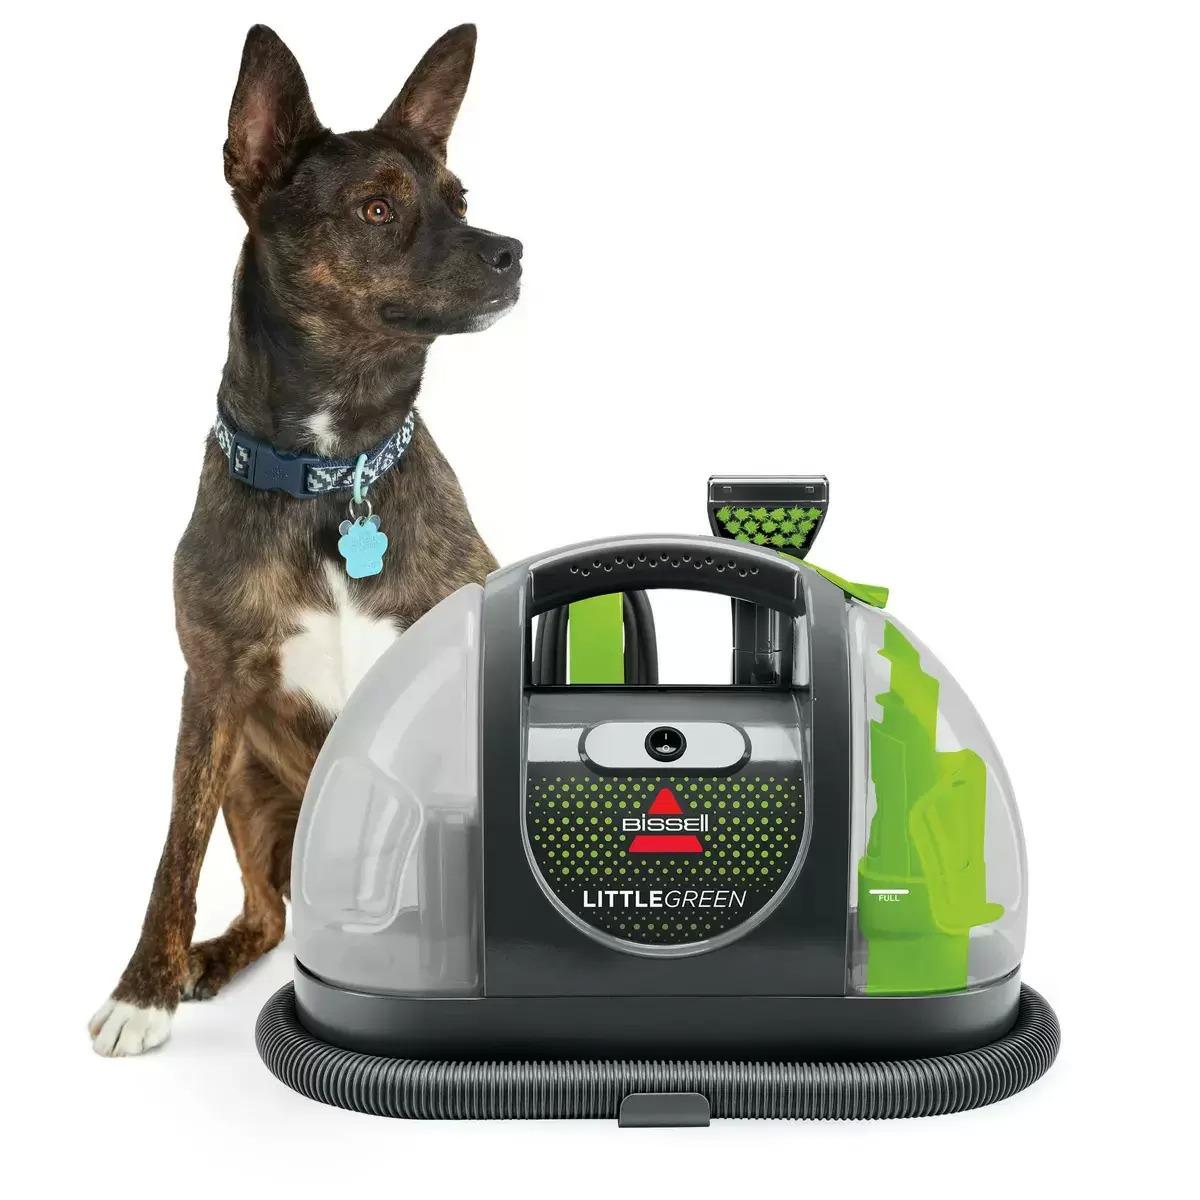 Bissell Little Green Portable Carpet Cleaner 3369 for $89 Shipped